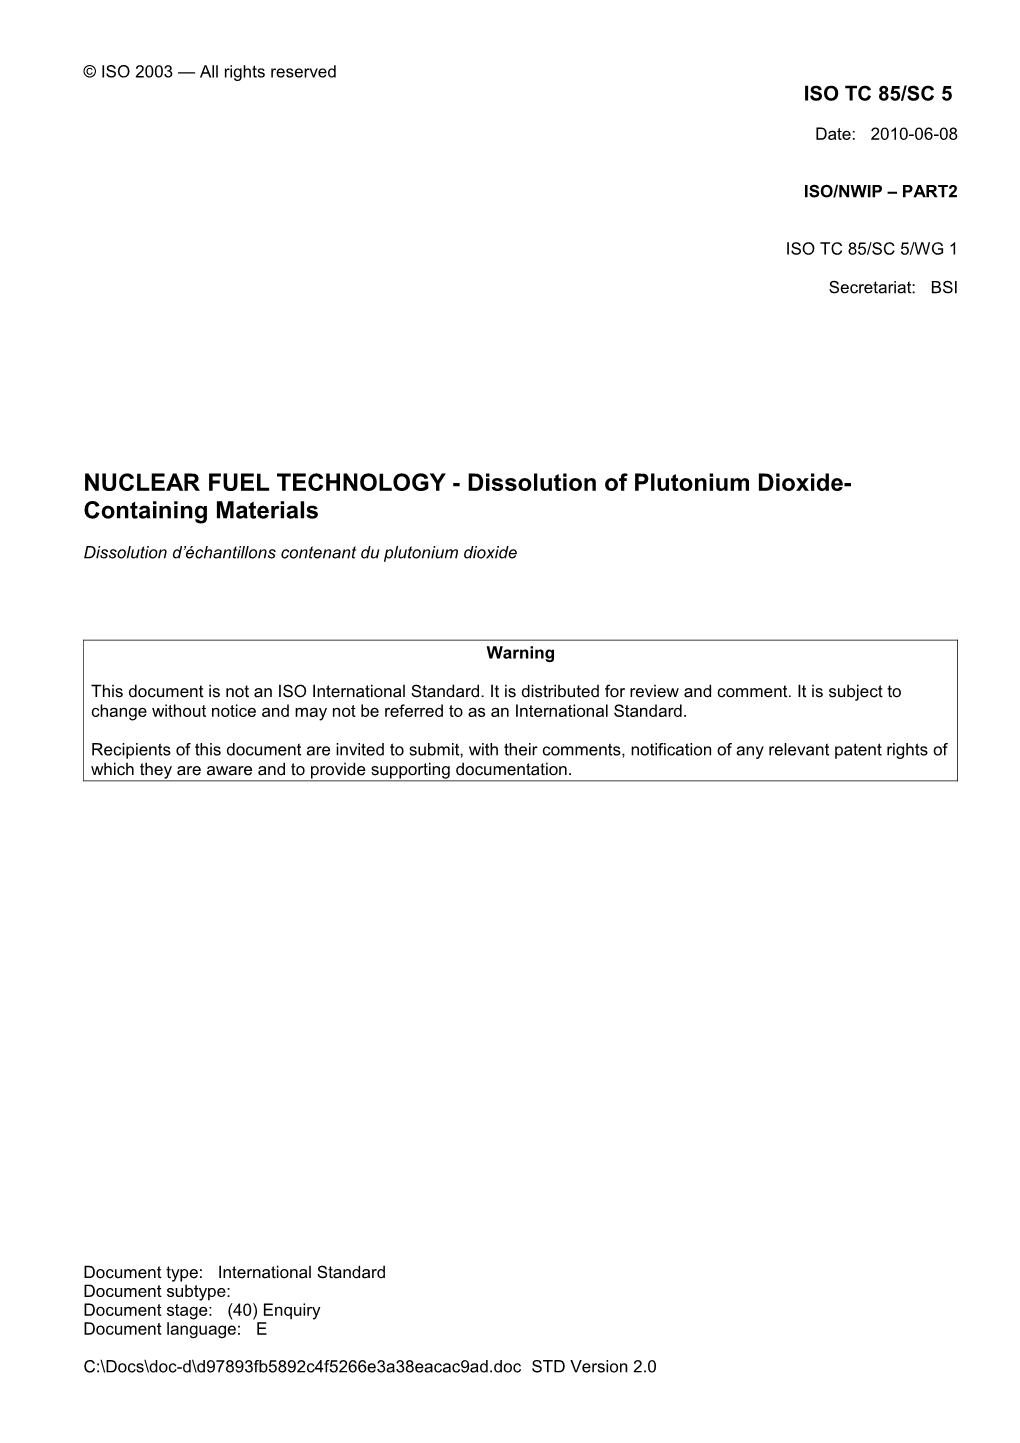 NUCLEAR FUEL TECHNOLOGY - Dissolution of Plutonium Dioxide-Containing Materials